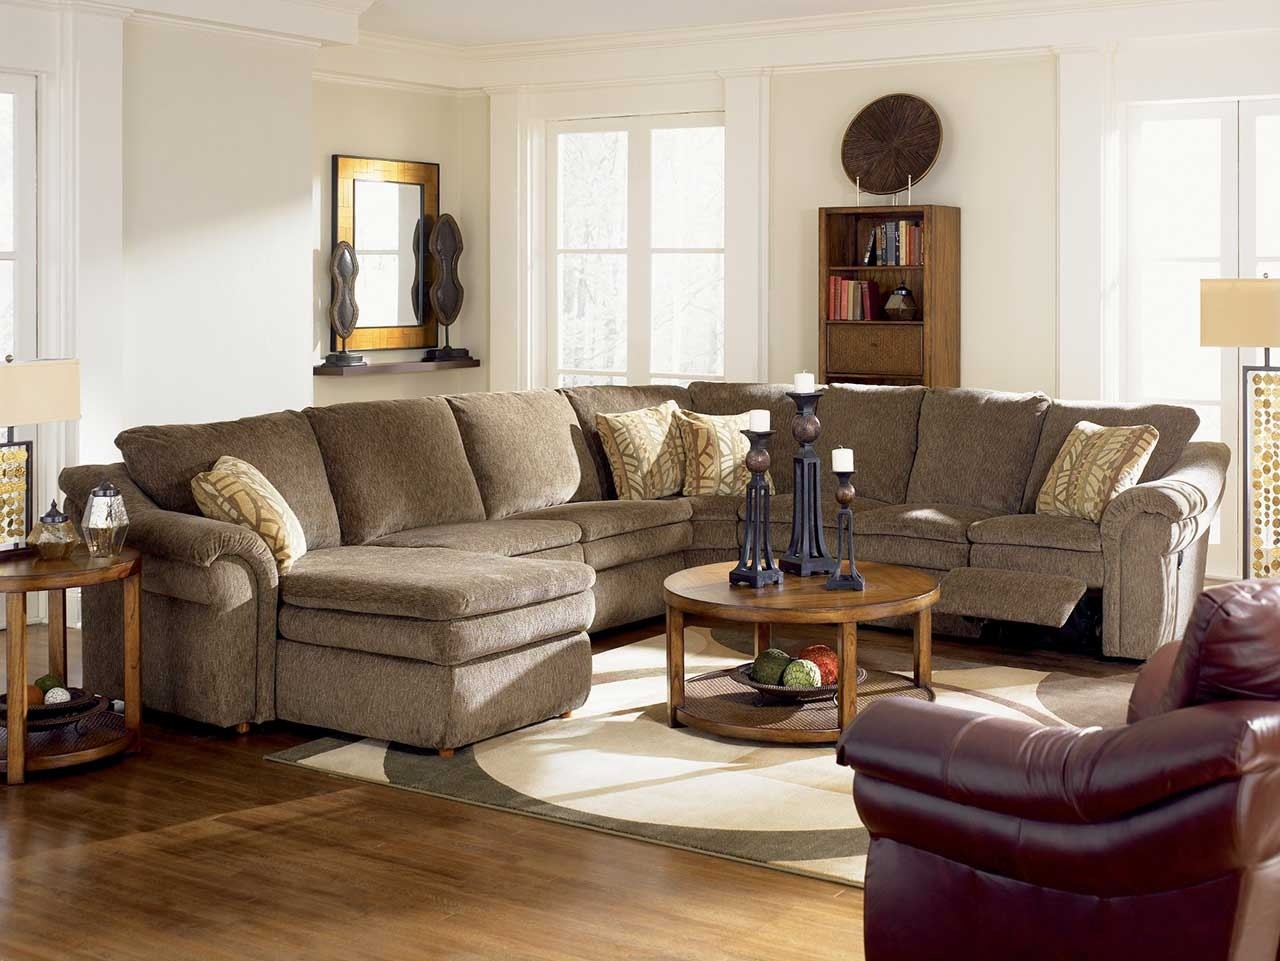 Small reclining sectional